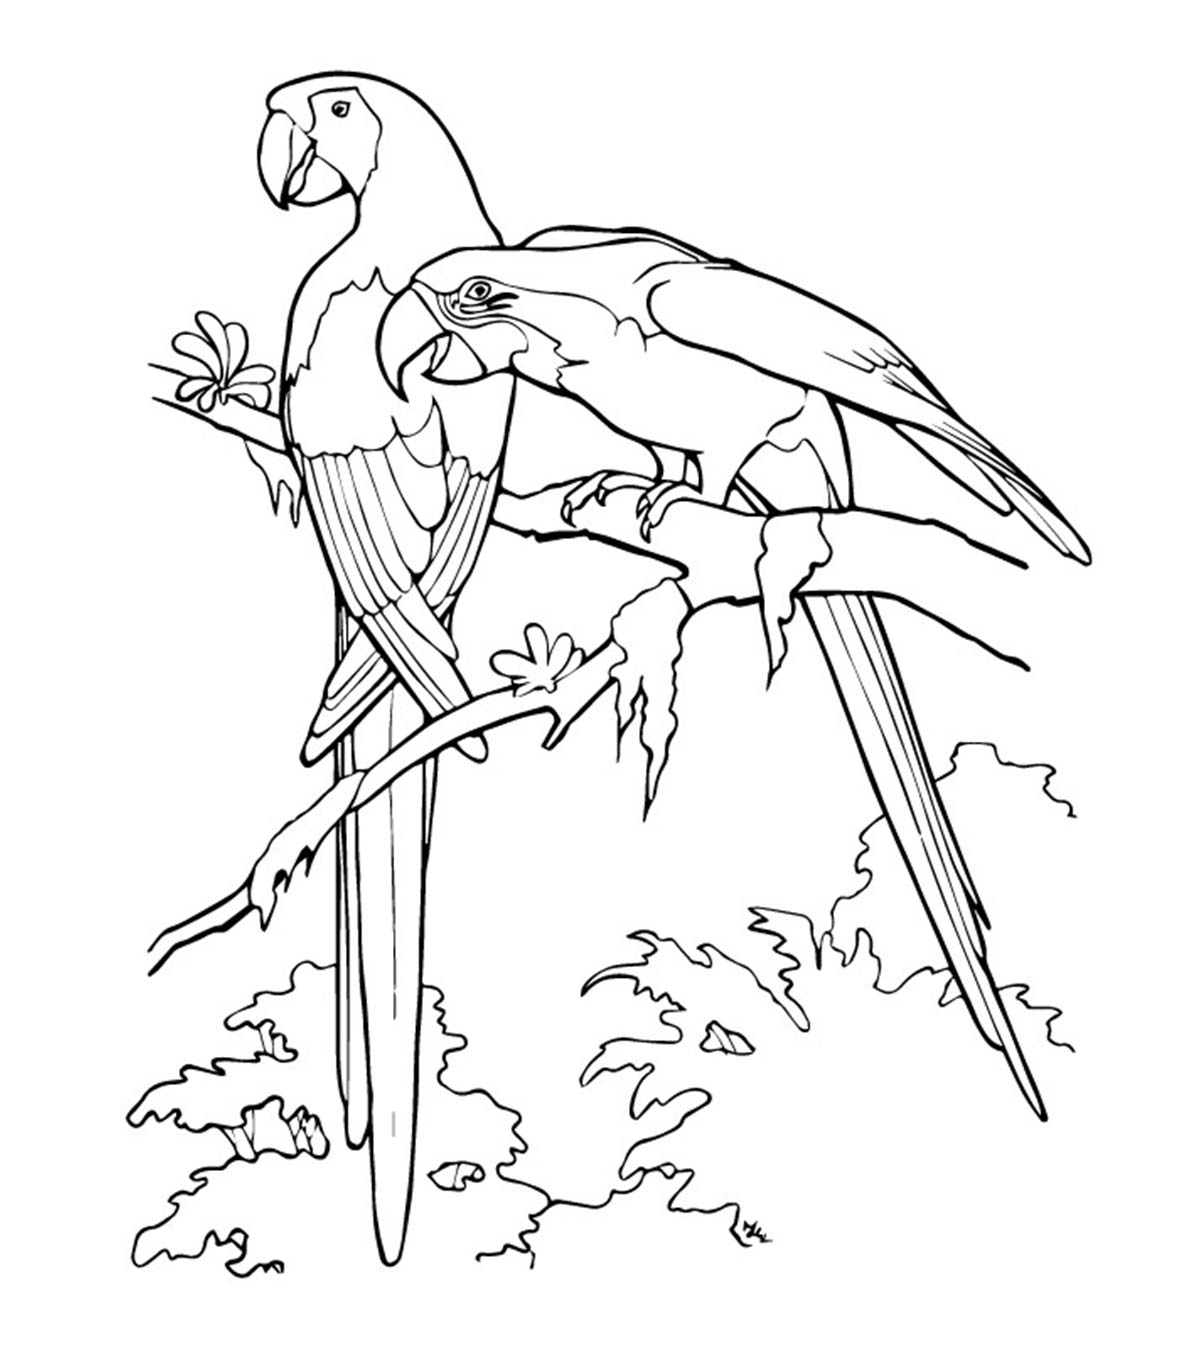 25 Cute Parrot Coloring Pages Your Toddler Will Love To Color